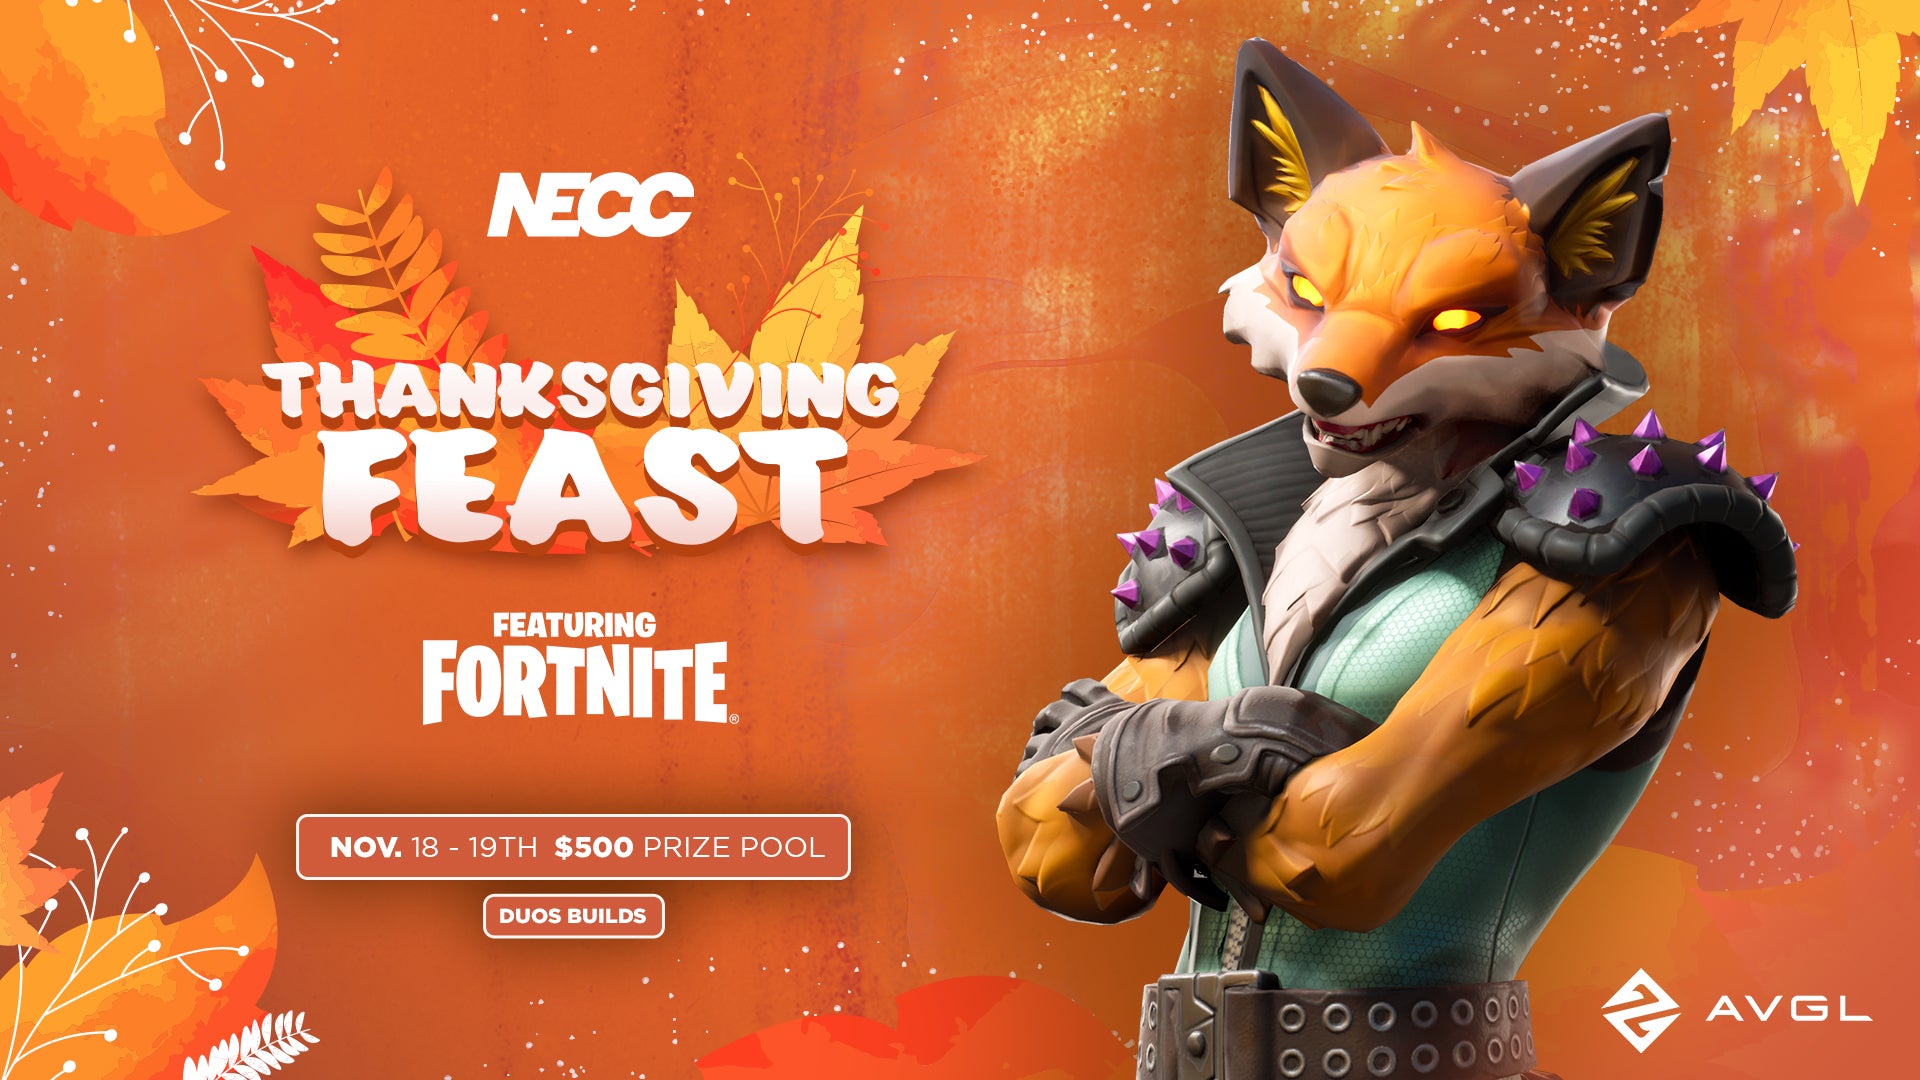 NECC Announces Fortnite Duos Thanksgiving Feast Tournament in Conjunction with AVGL